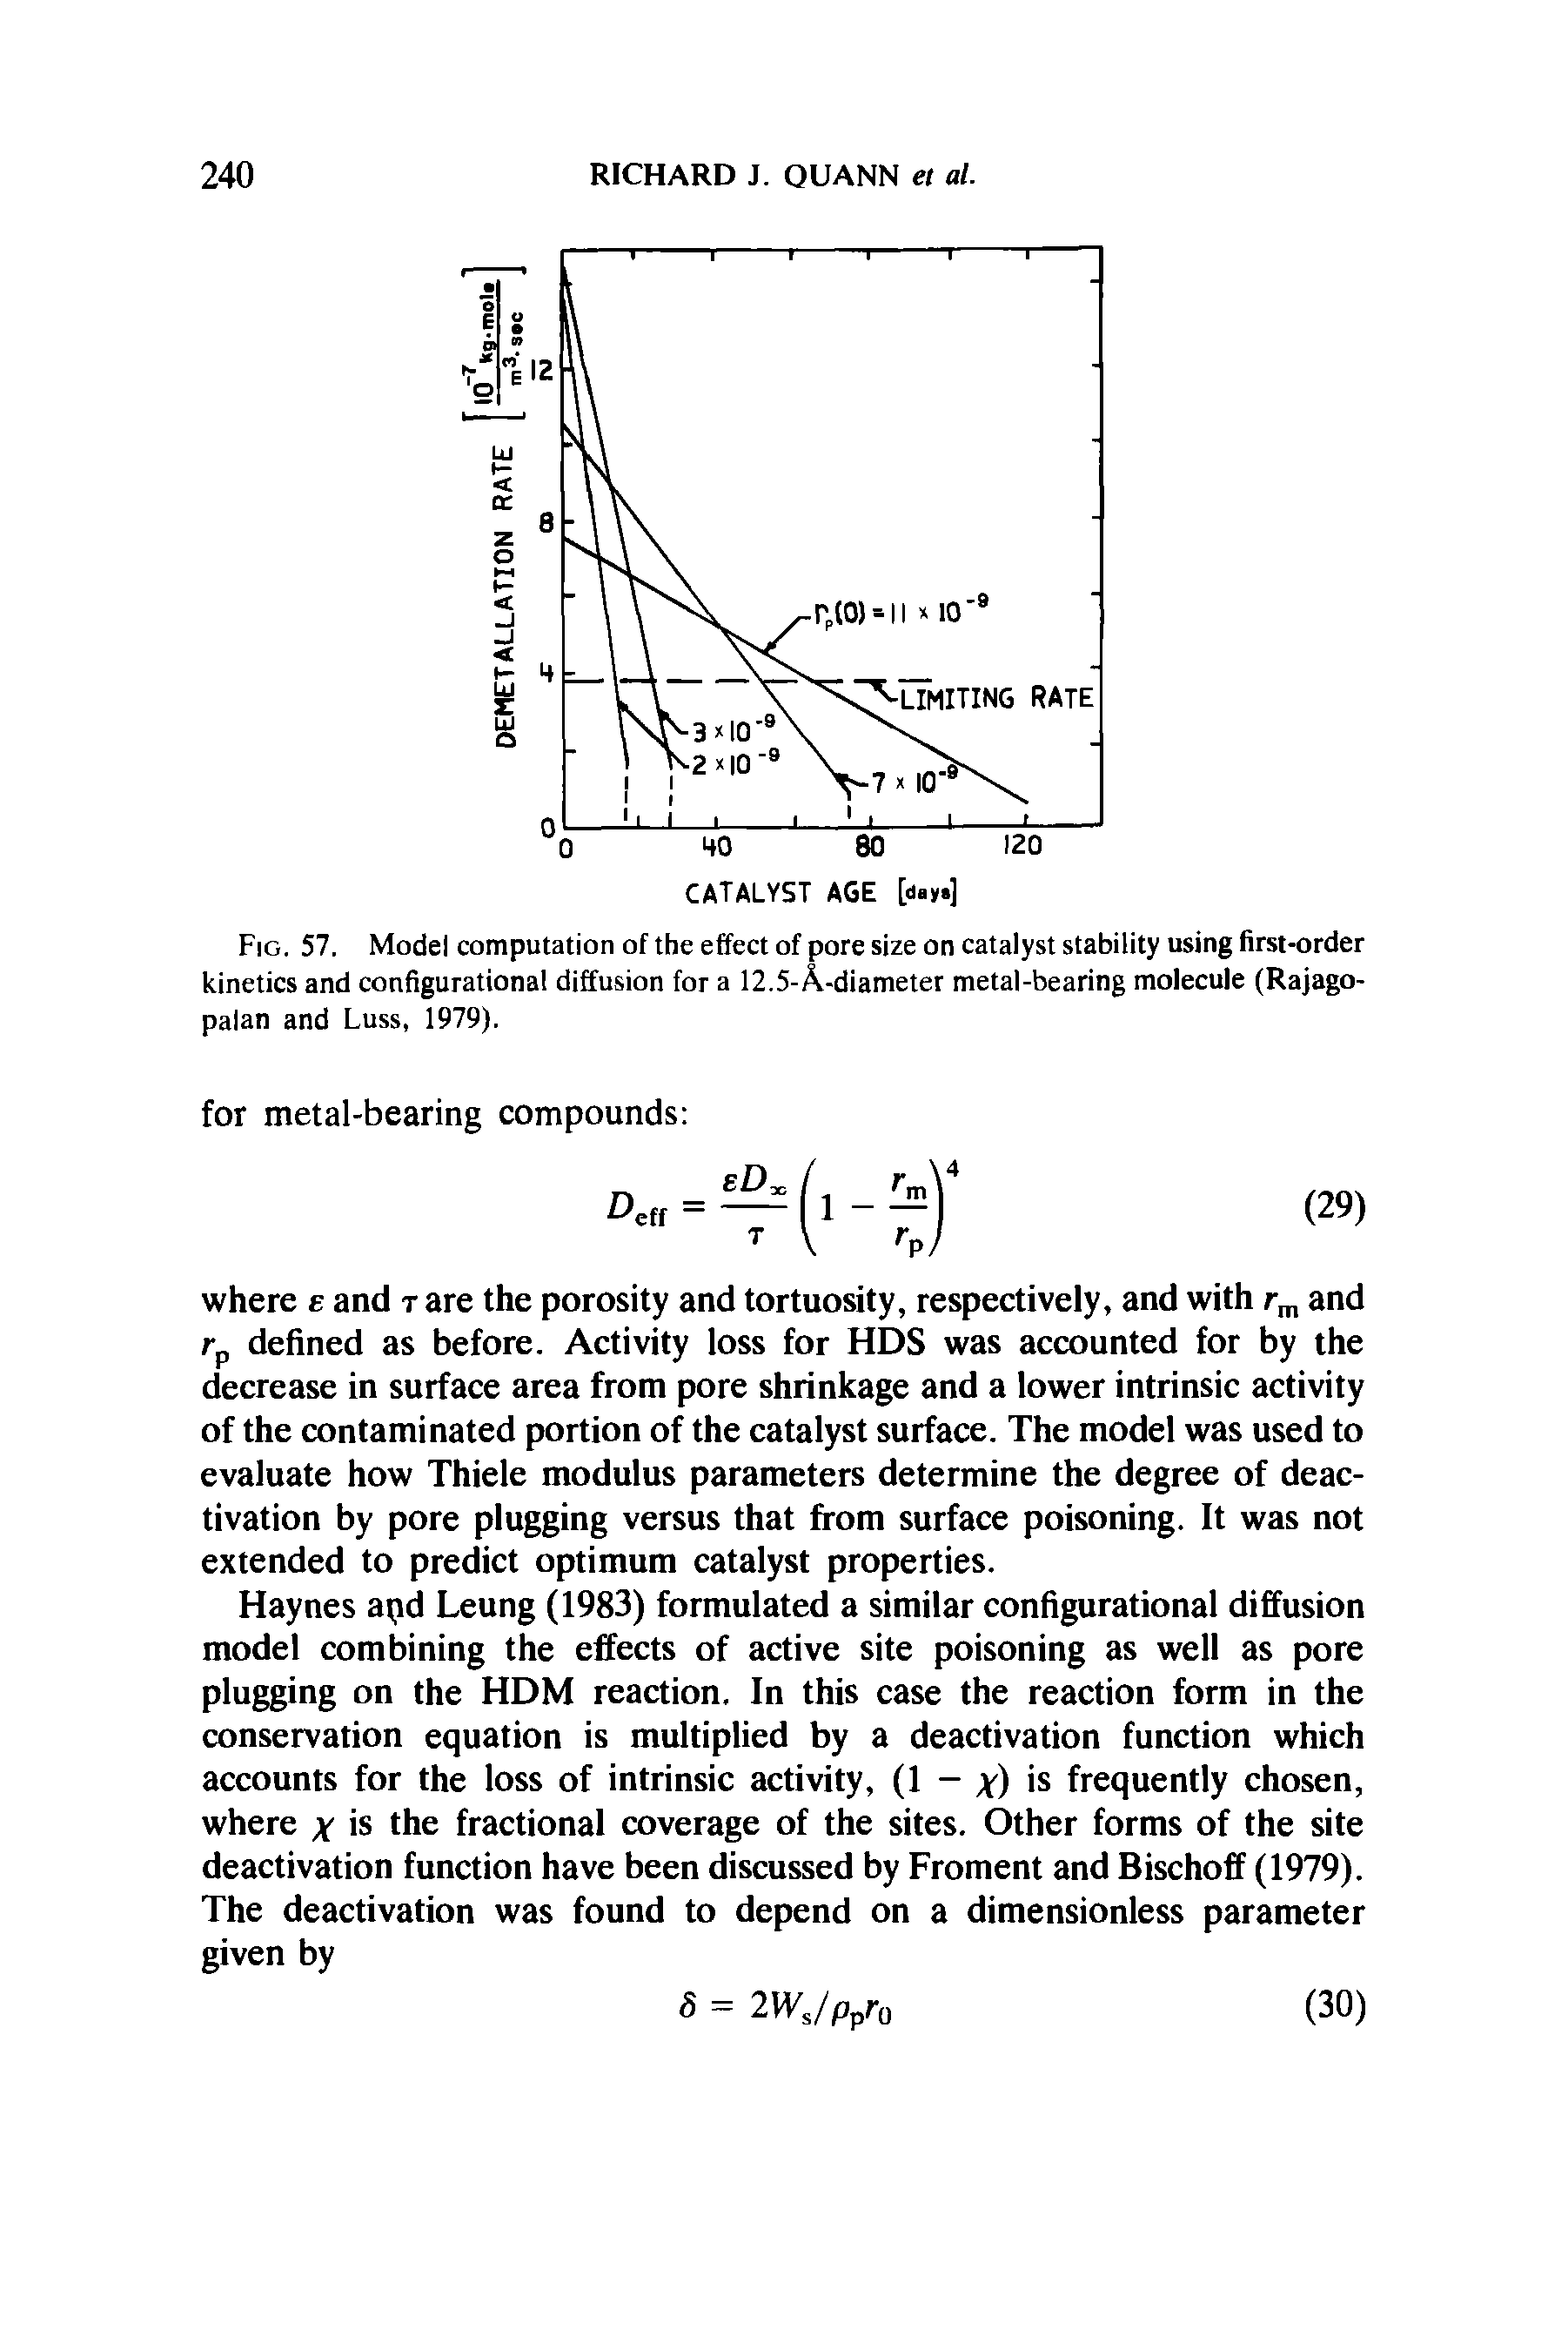 Fig. 57. Model computation of the effect of pore size on catalyst stability using first-order kinetics and configurational diffusion for a 12.5- A-diameter metal-bearing molecule (Rajago-palan and Luss, 1979).